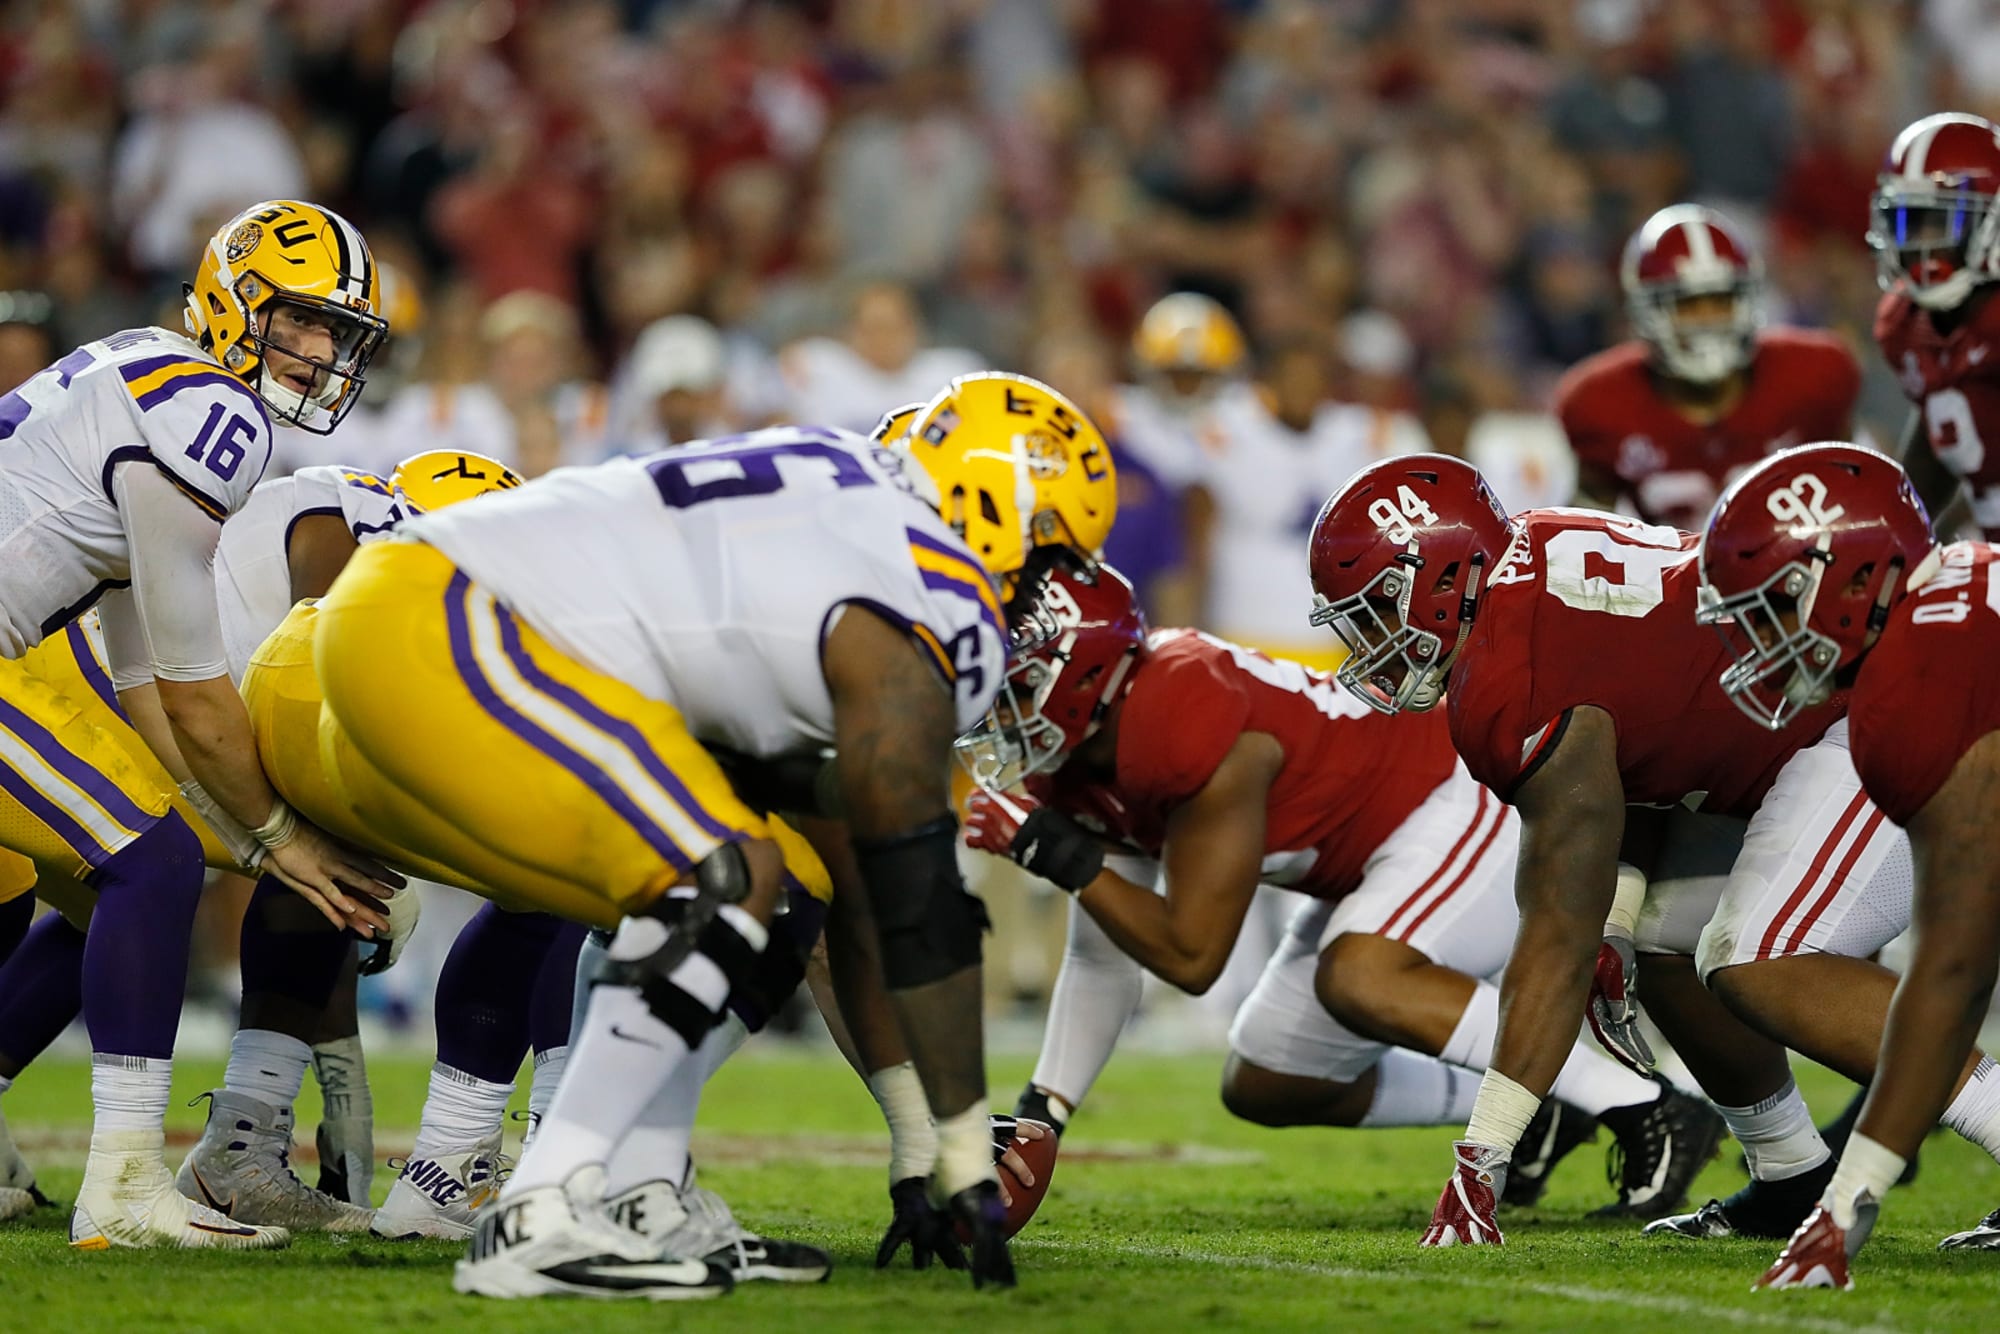 Alabama vs. LSU Rivalry History in the NFL Draft